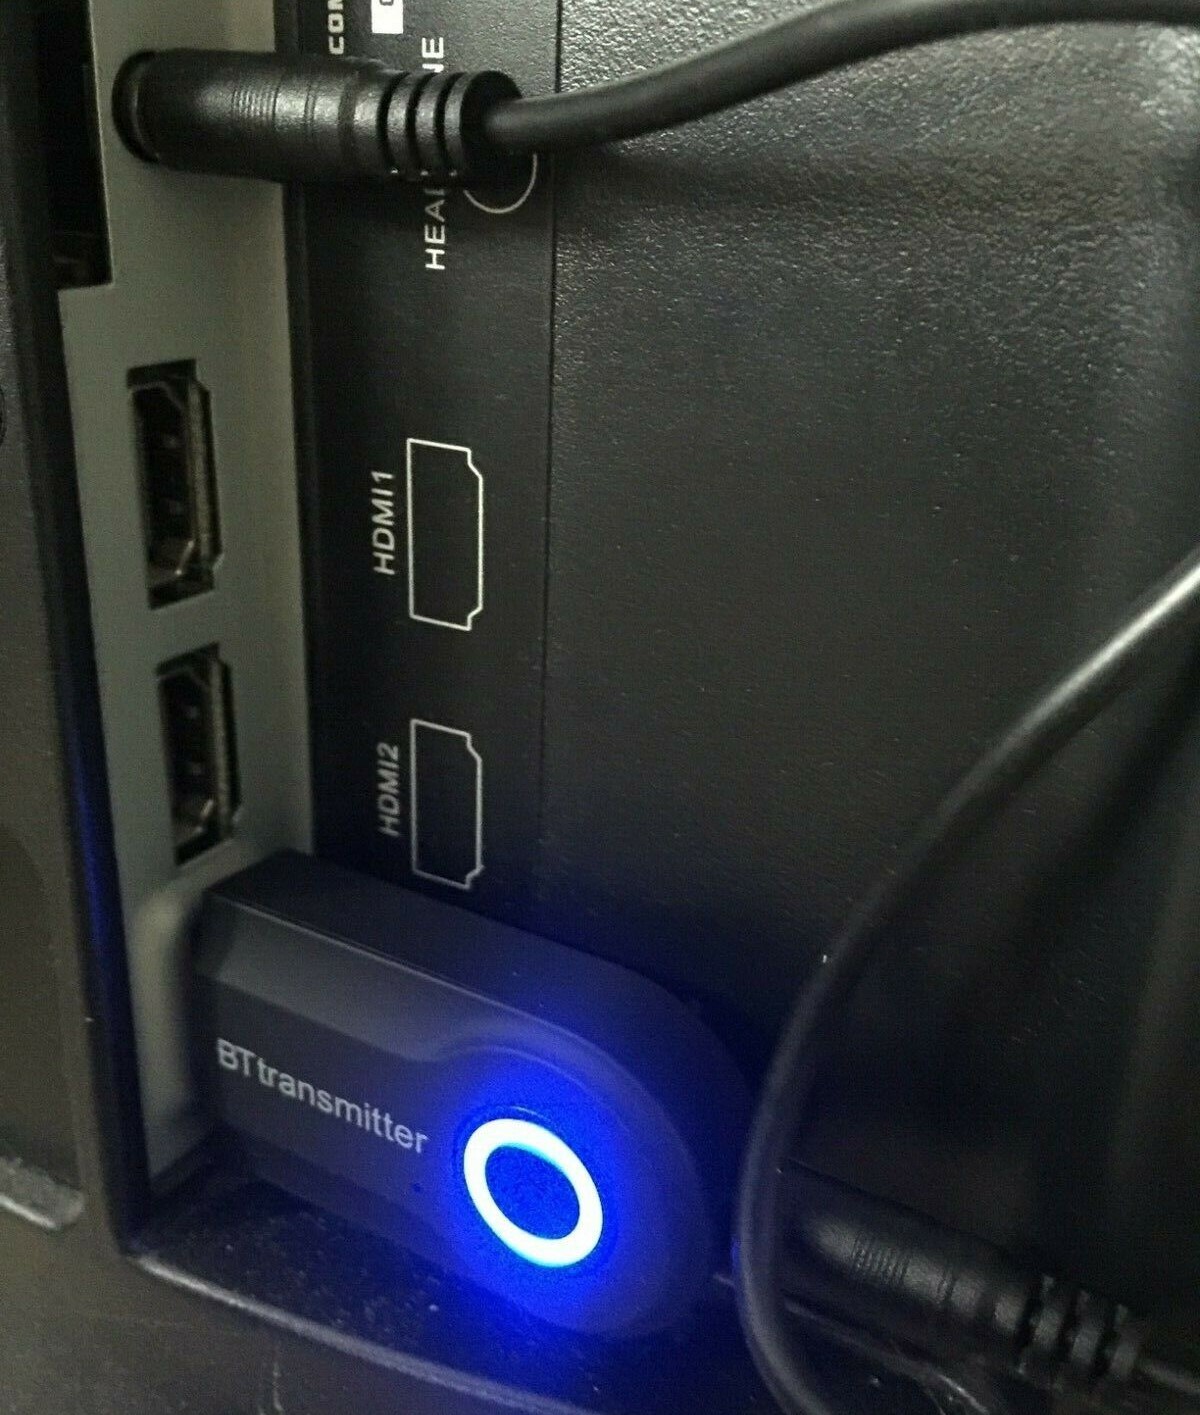 Plug in transmitter to USB Port